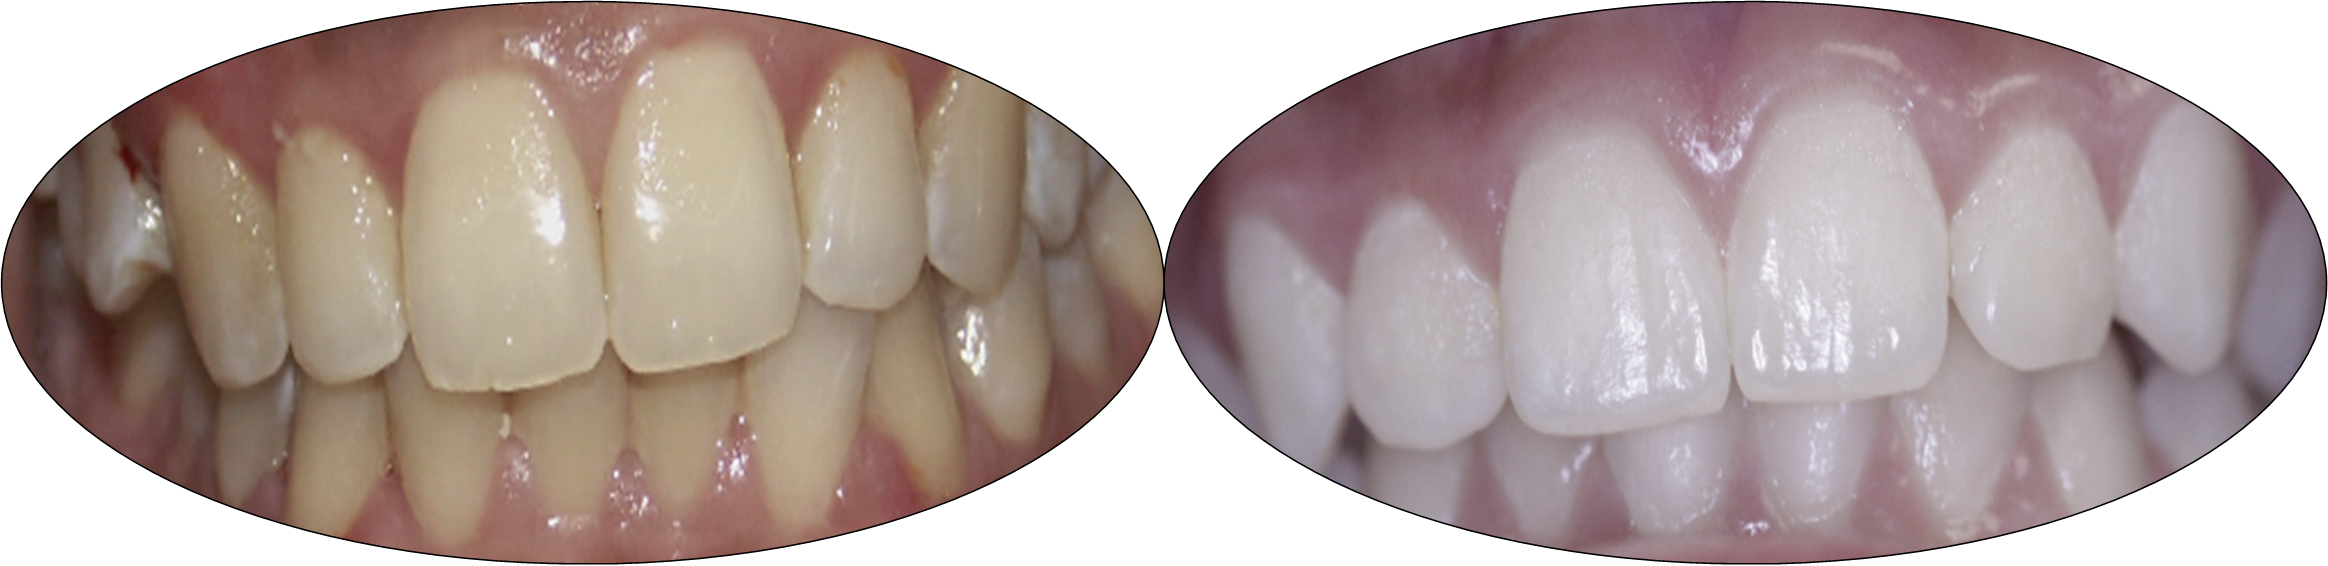 Smile gallery images, before and after Invisalign, patient three